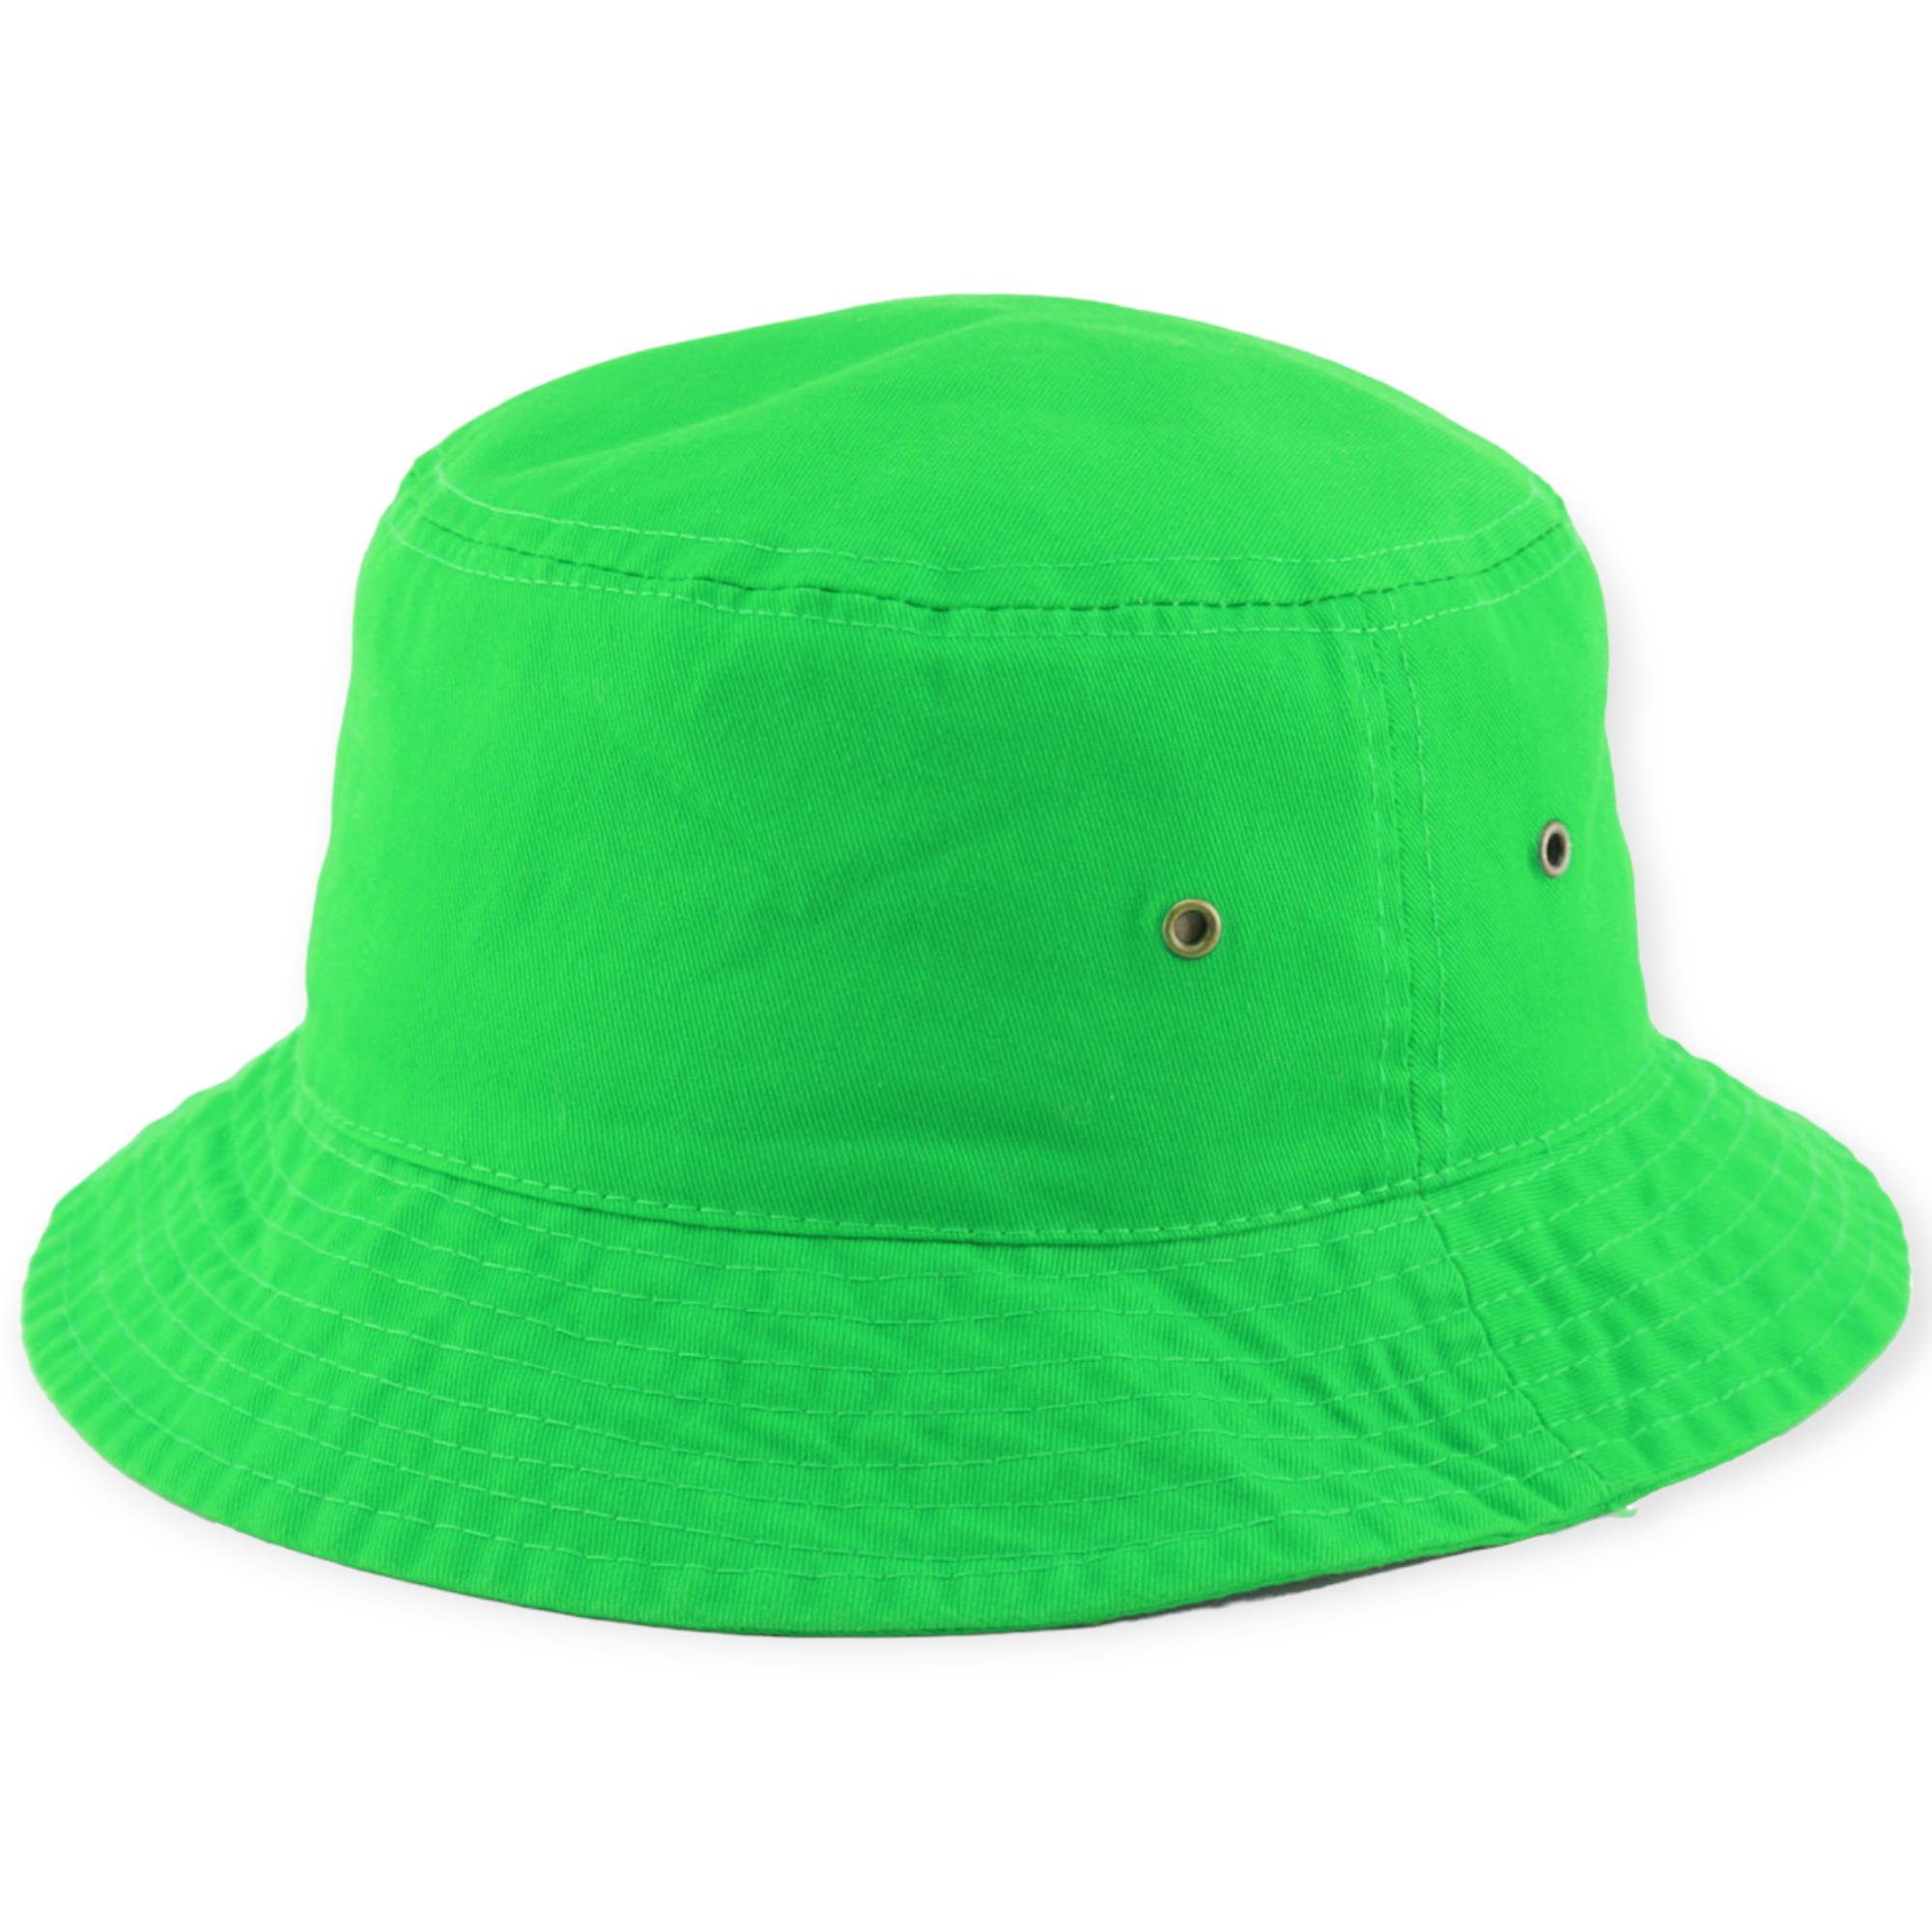 KB Ethos Solid Bucket Hat Fitted (Neon Green)